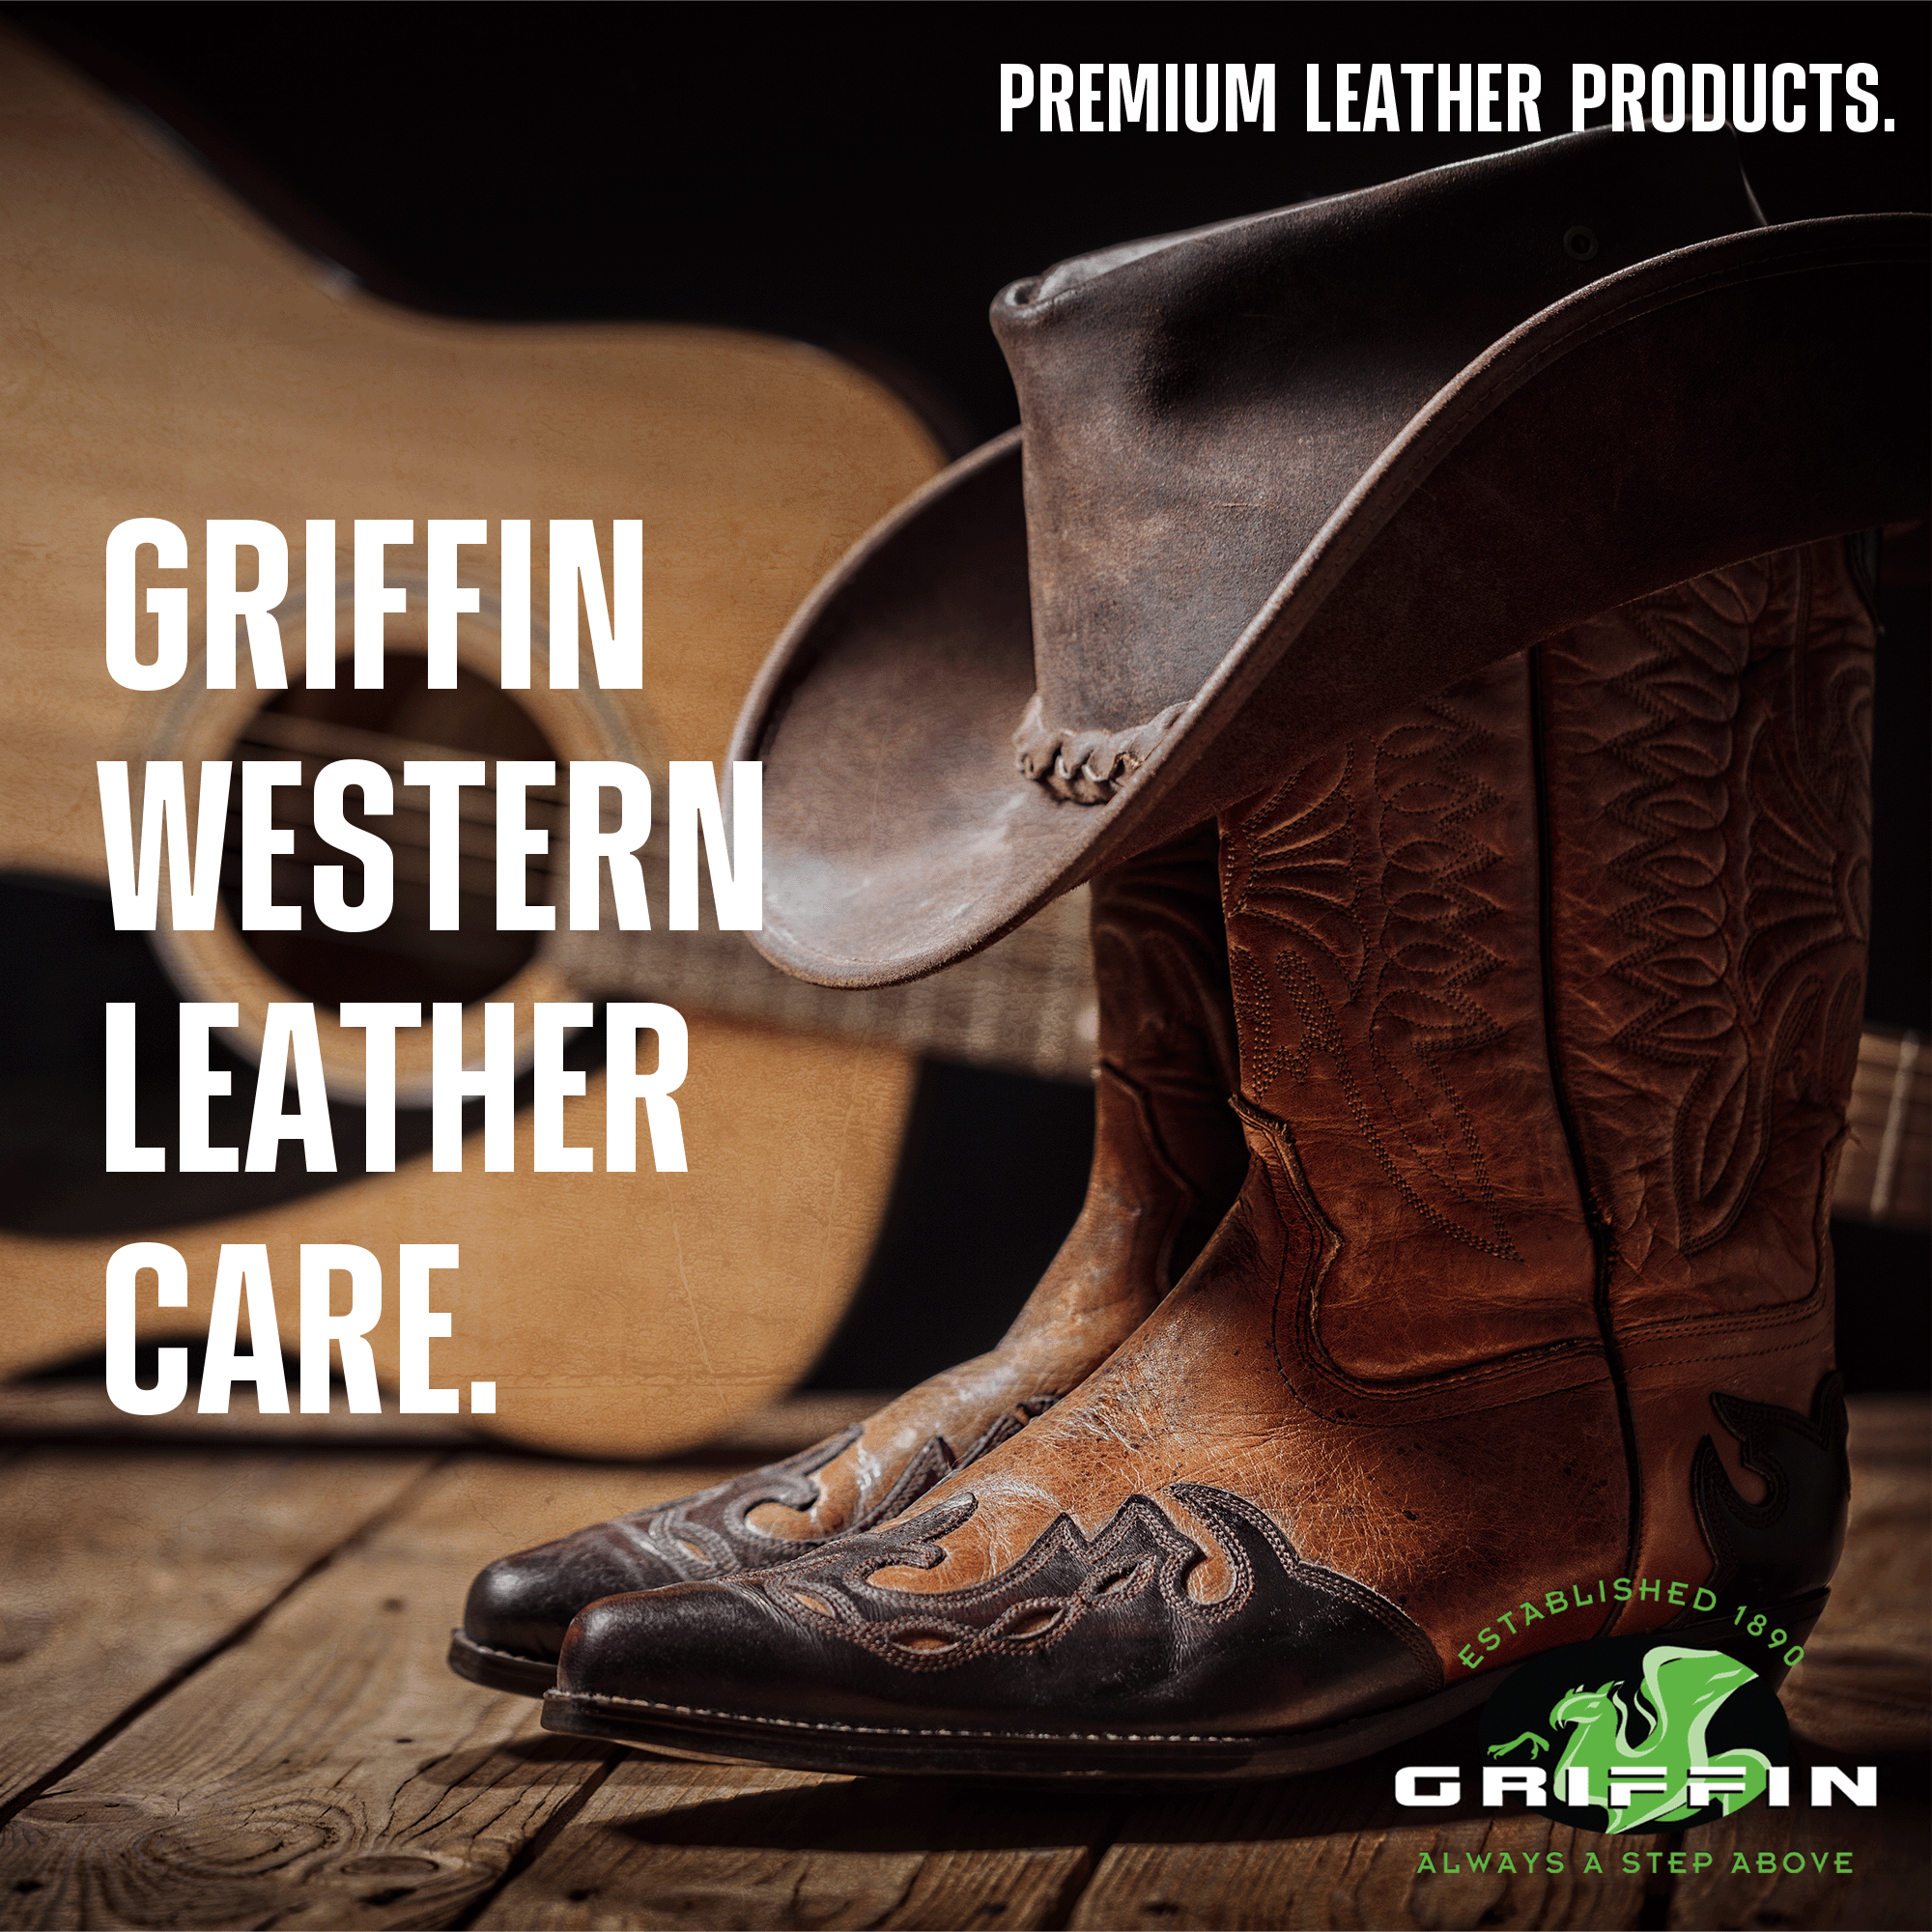 Western Boot Leather Cleaner